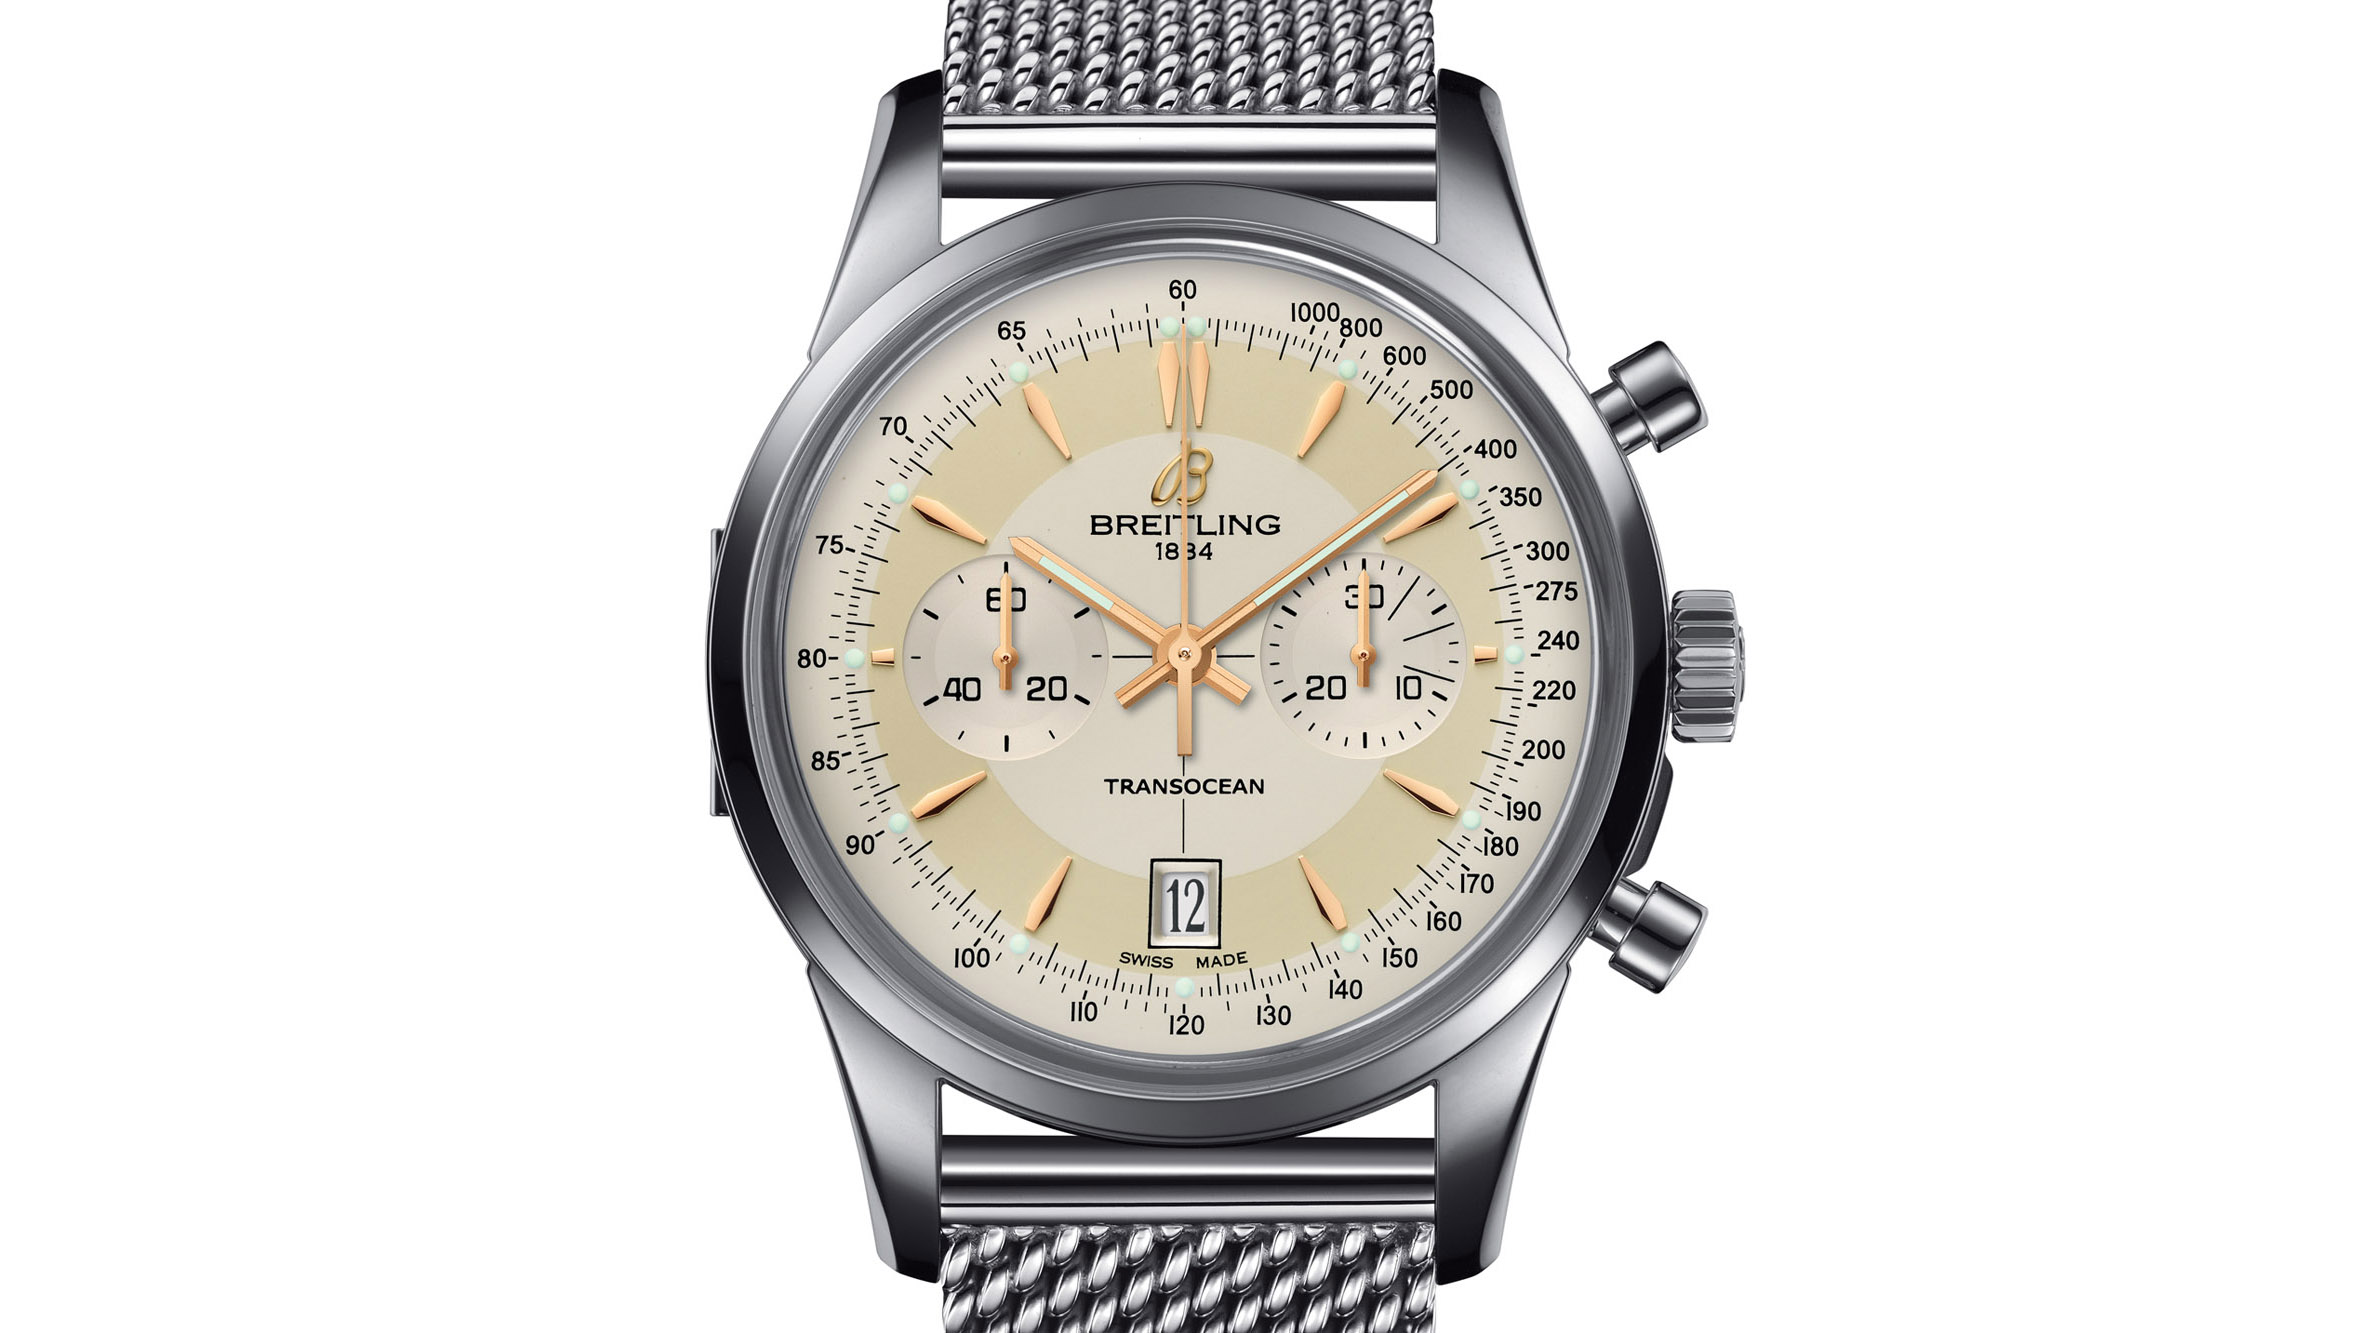 New Watch: Breitling Transocean Chronograph Edition - Bloomberg